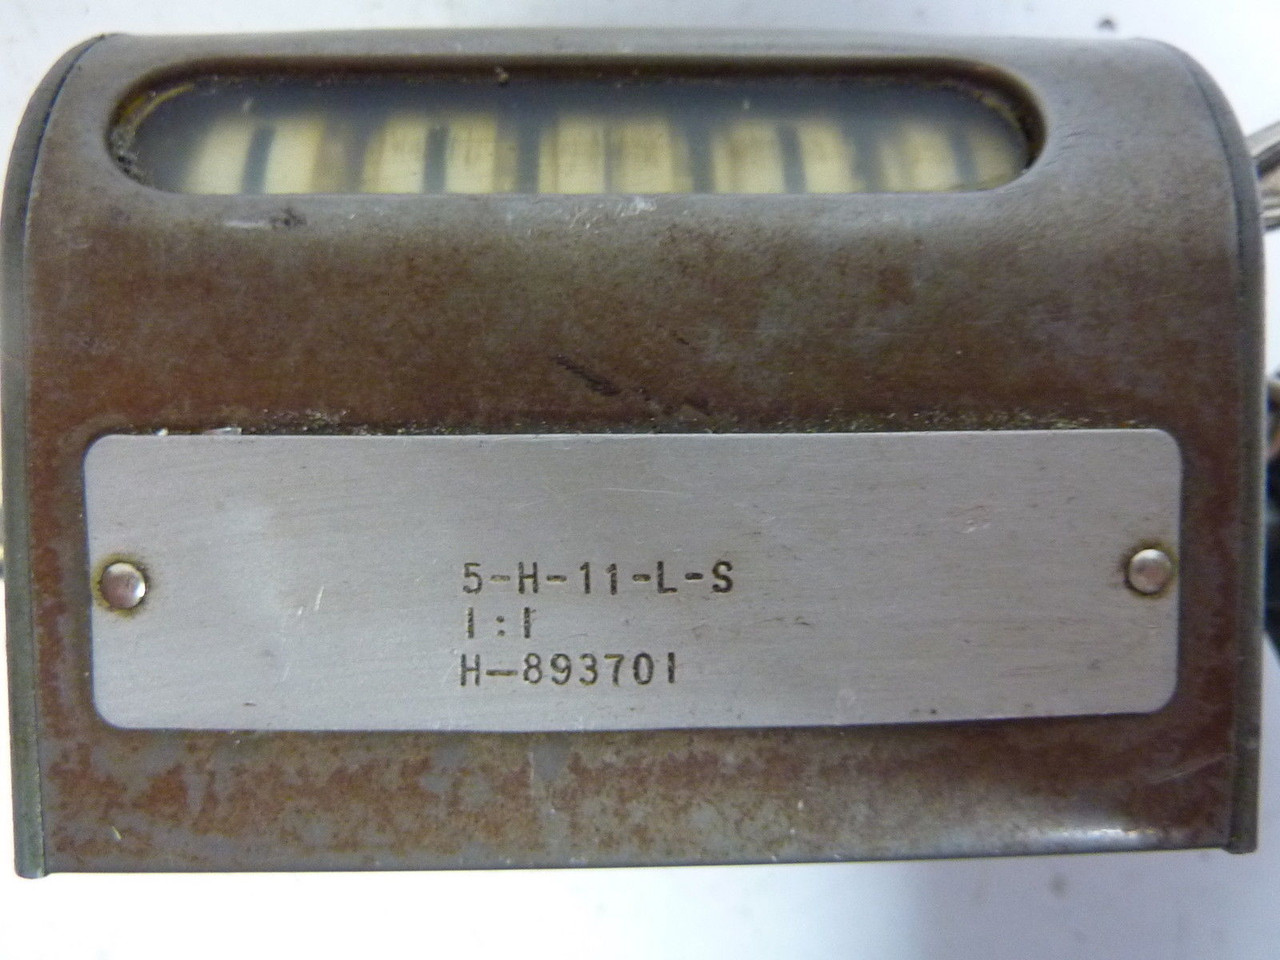 Durant / Eaton Corp. 5-H-11-L-S Counter Stroke 5 Digit USED